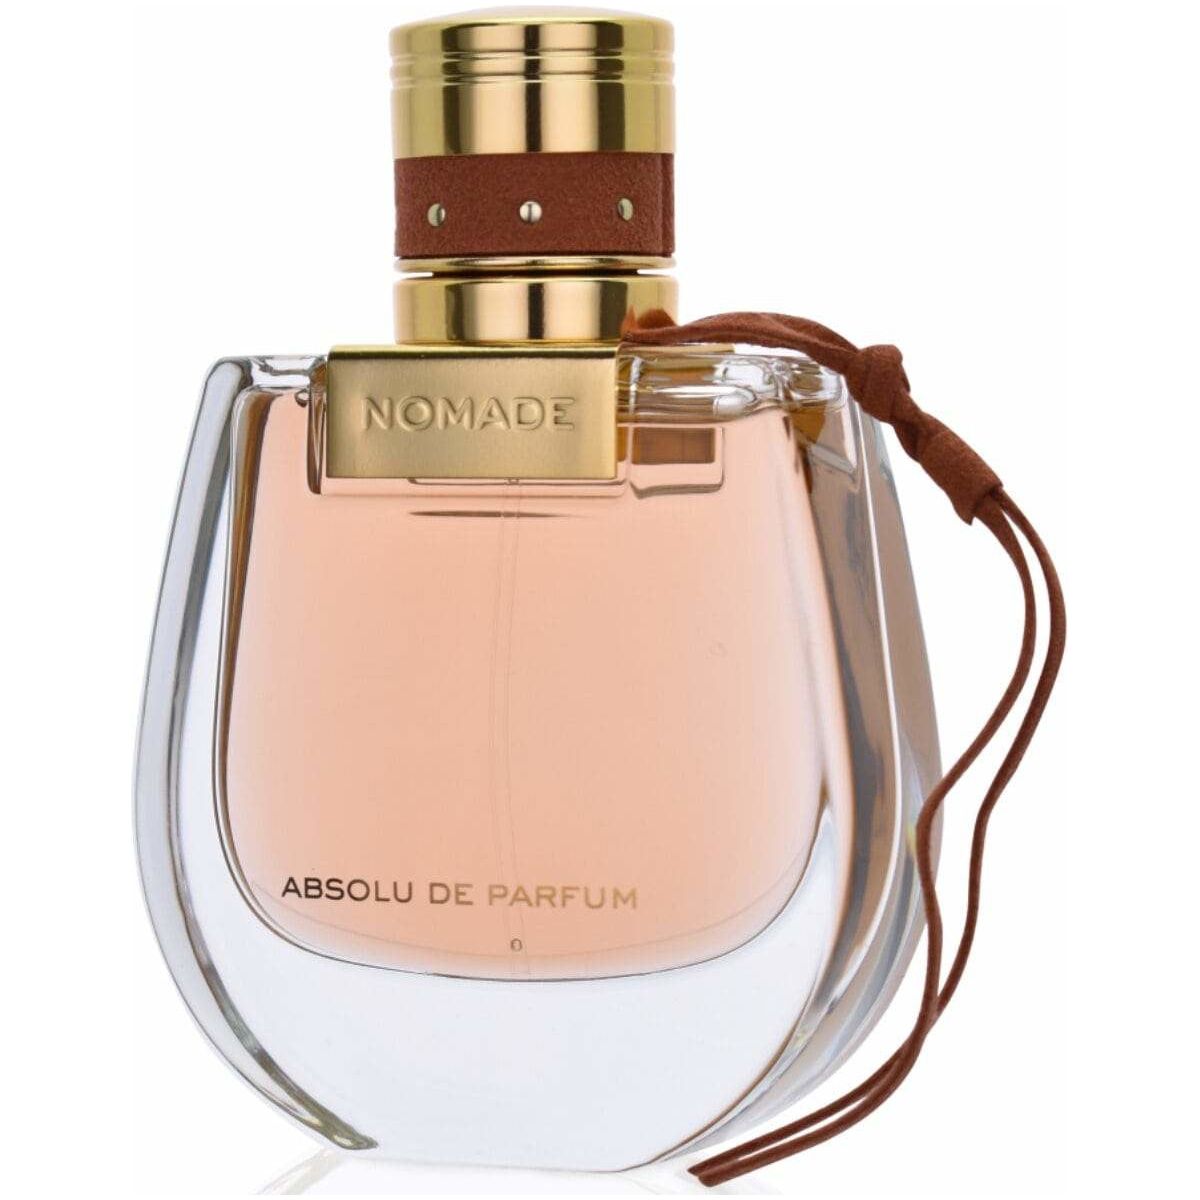 Nomade Absolu de Parfum by Chloe for her 2.5 oz New Tester